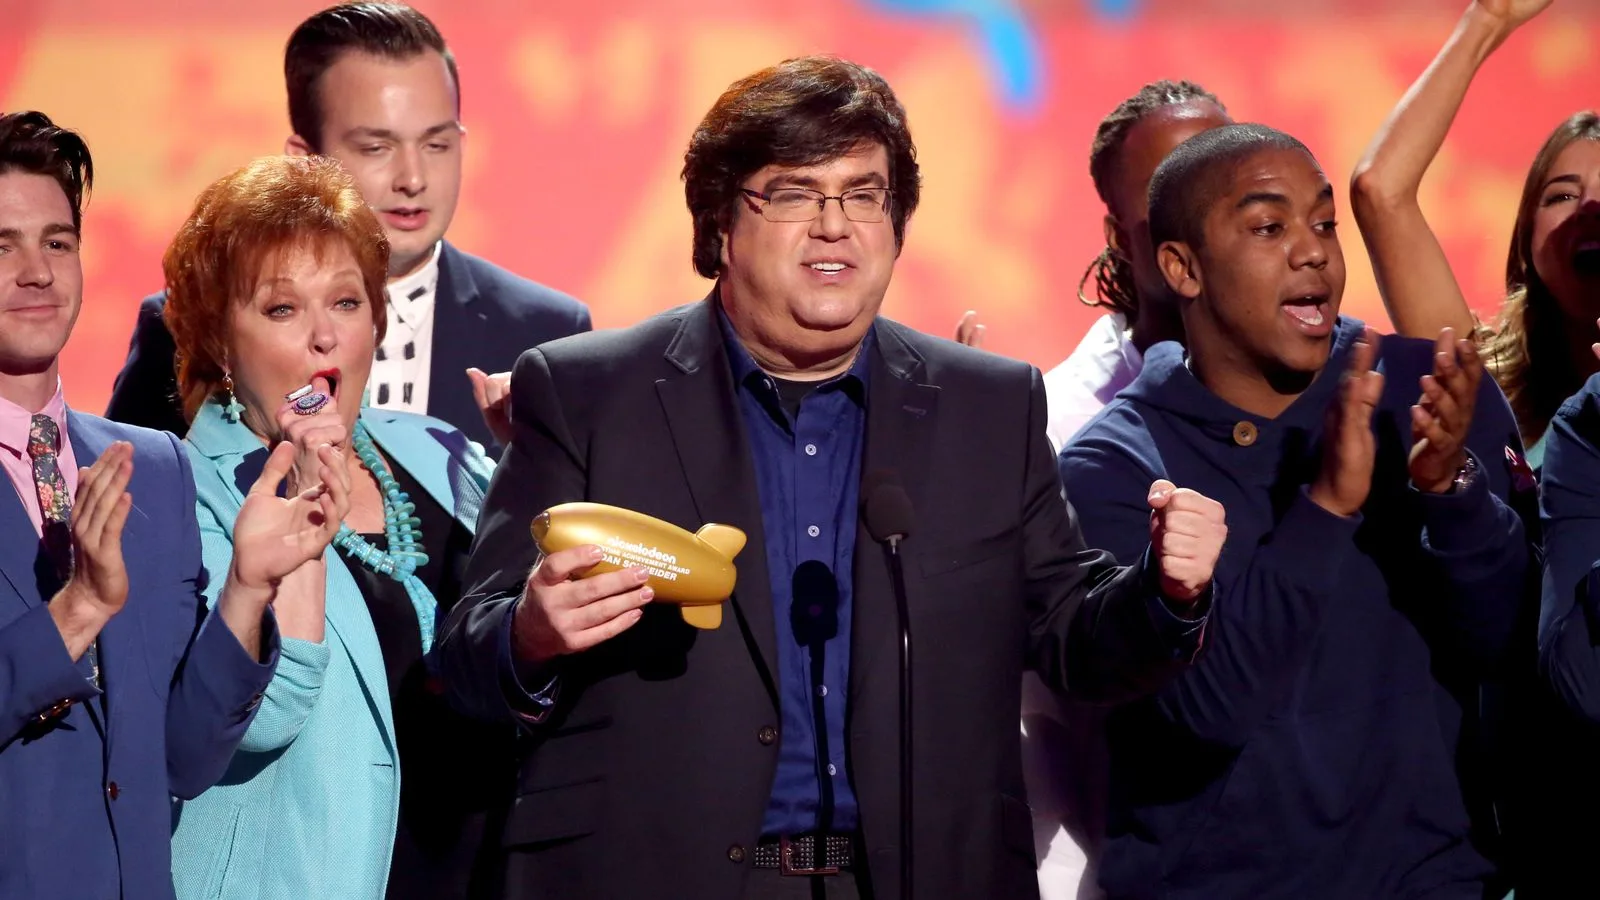 Dan Schneider: "I owe some pretty strong apologies" for Nickelodeon's "regretful" move